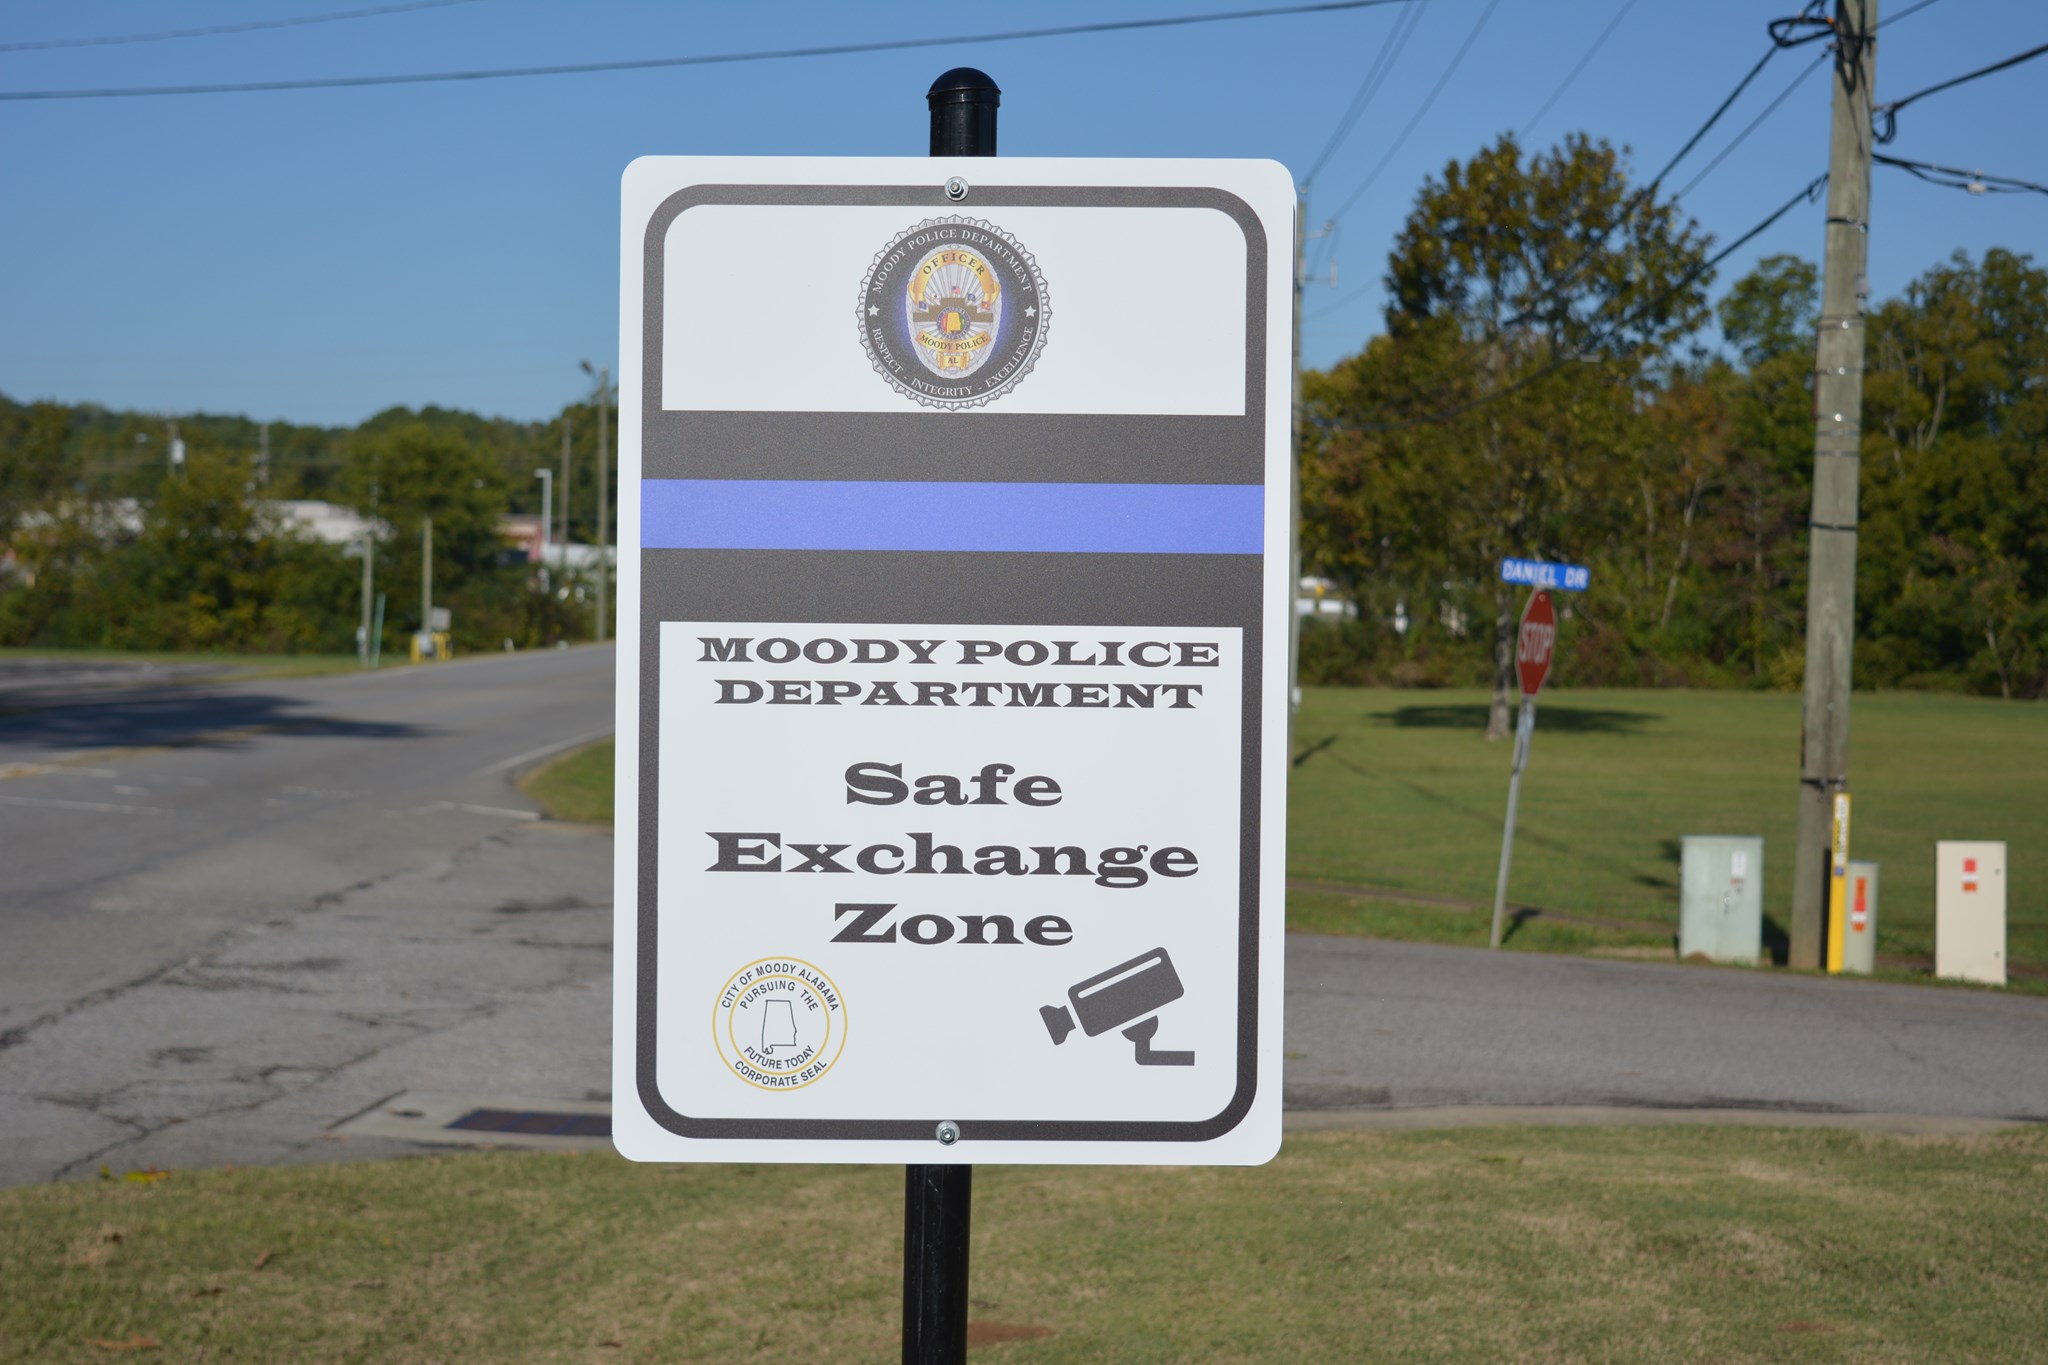 Moody Police set up Safe Exchange Zone for purchases